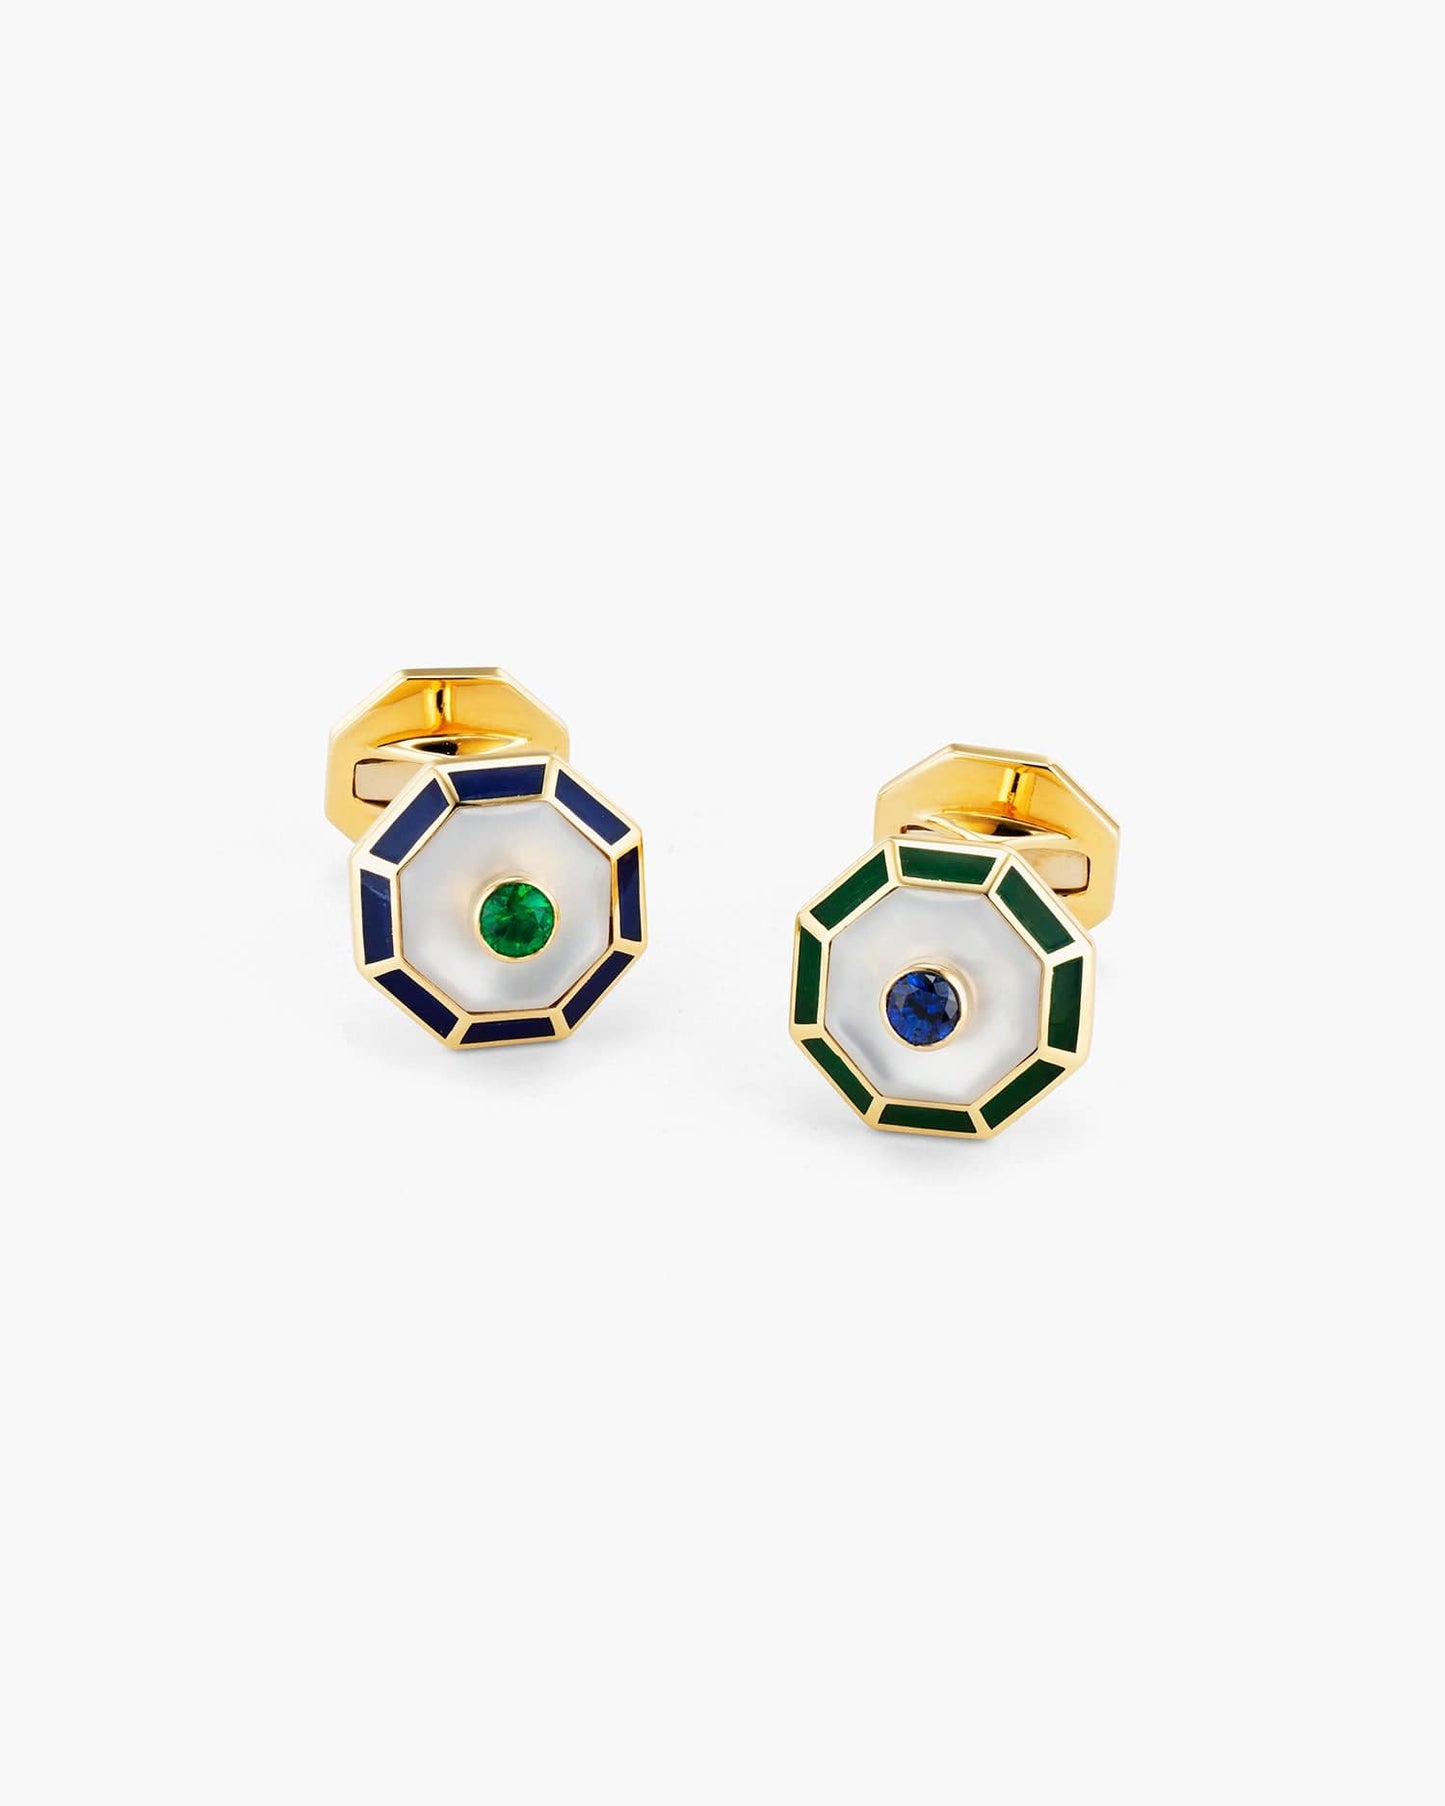 Emerald, Sapphire, Mother of Pearl and Enamel Octagonal Cufflinks